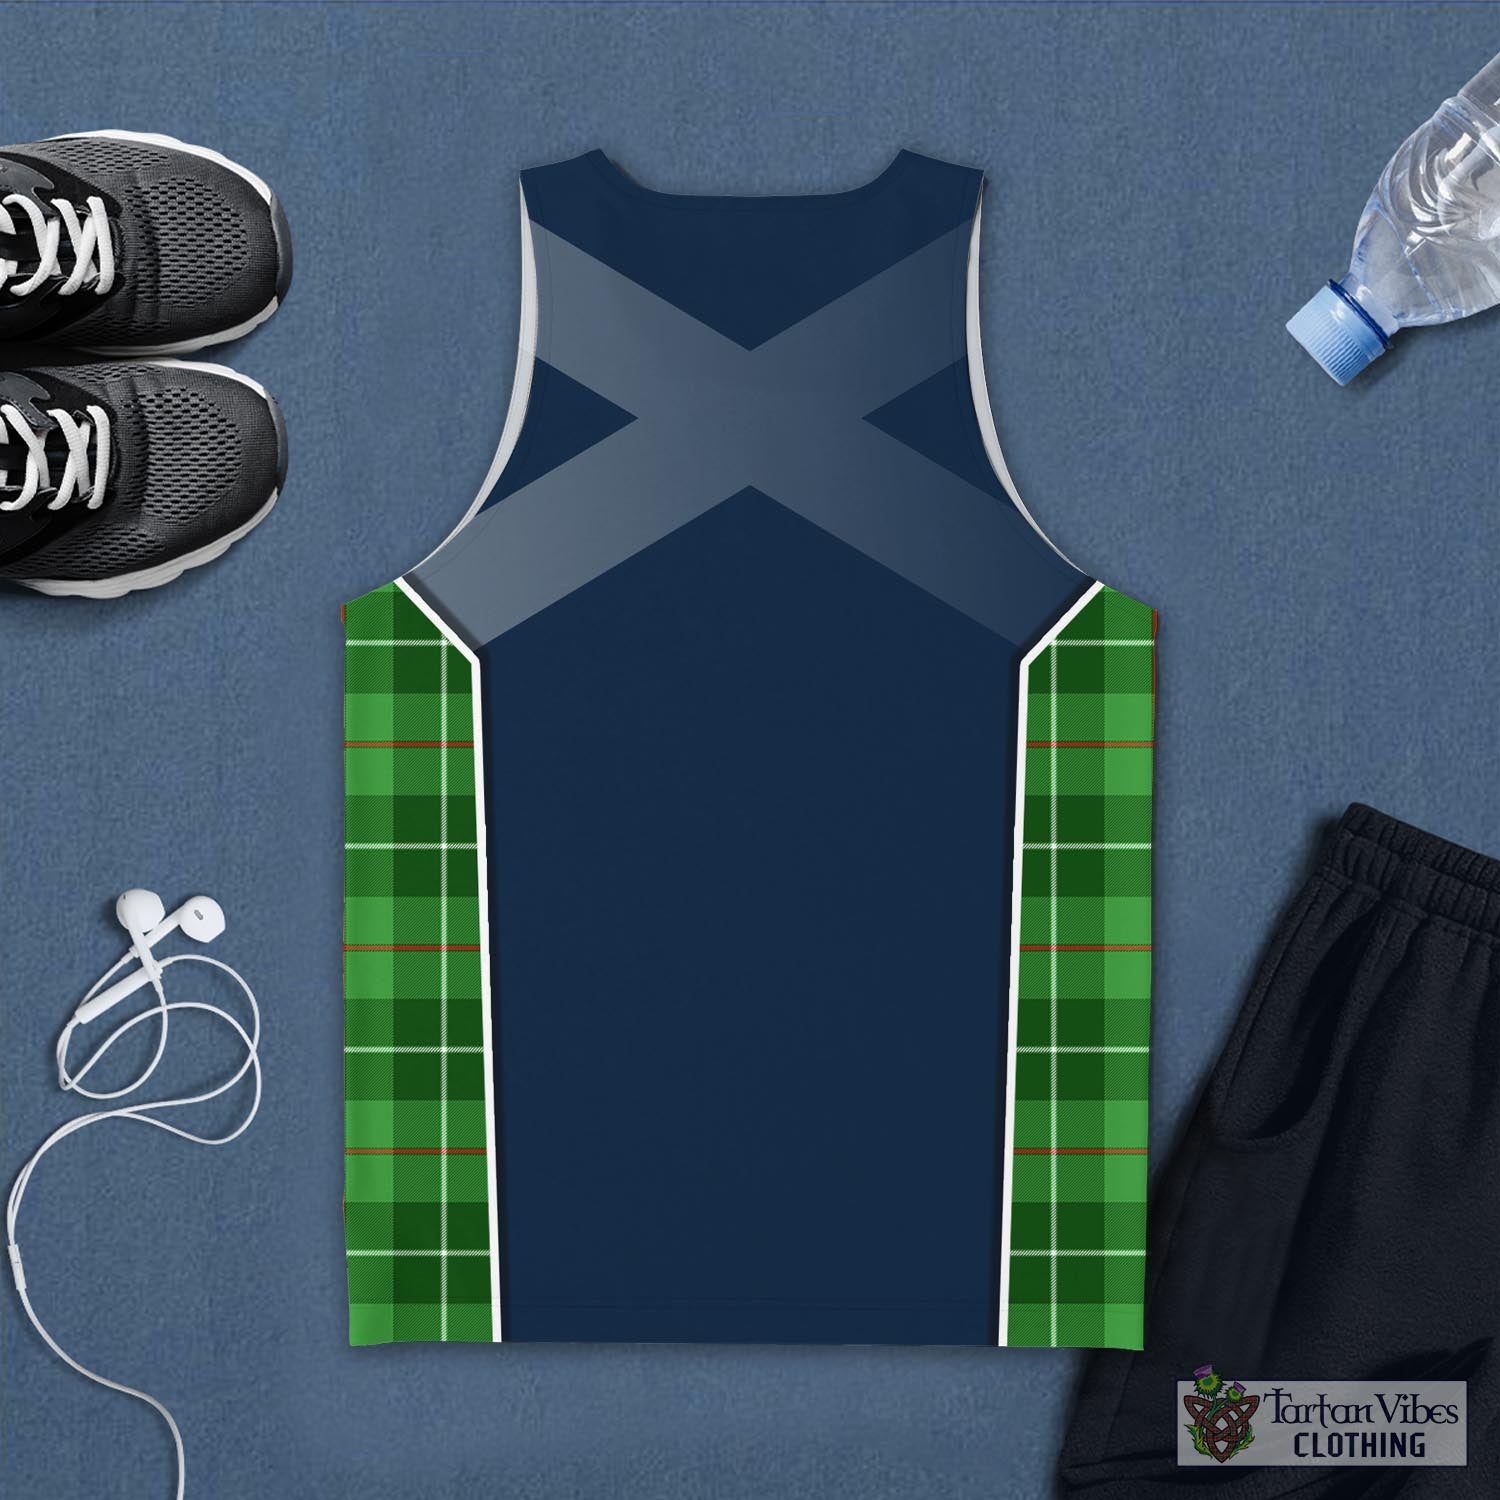 Tartan Vibes Clothing Clephan Tartan Men's Tanks Top with Family Crest and Scottish Thistle Vibes Sport Style